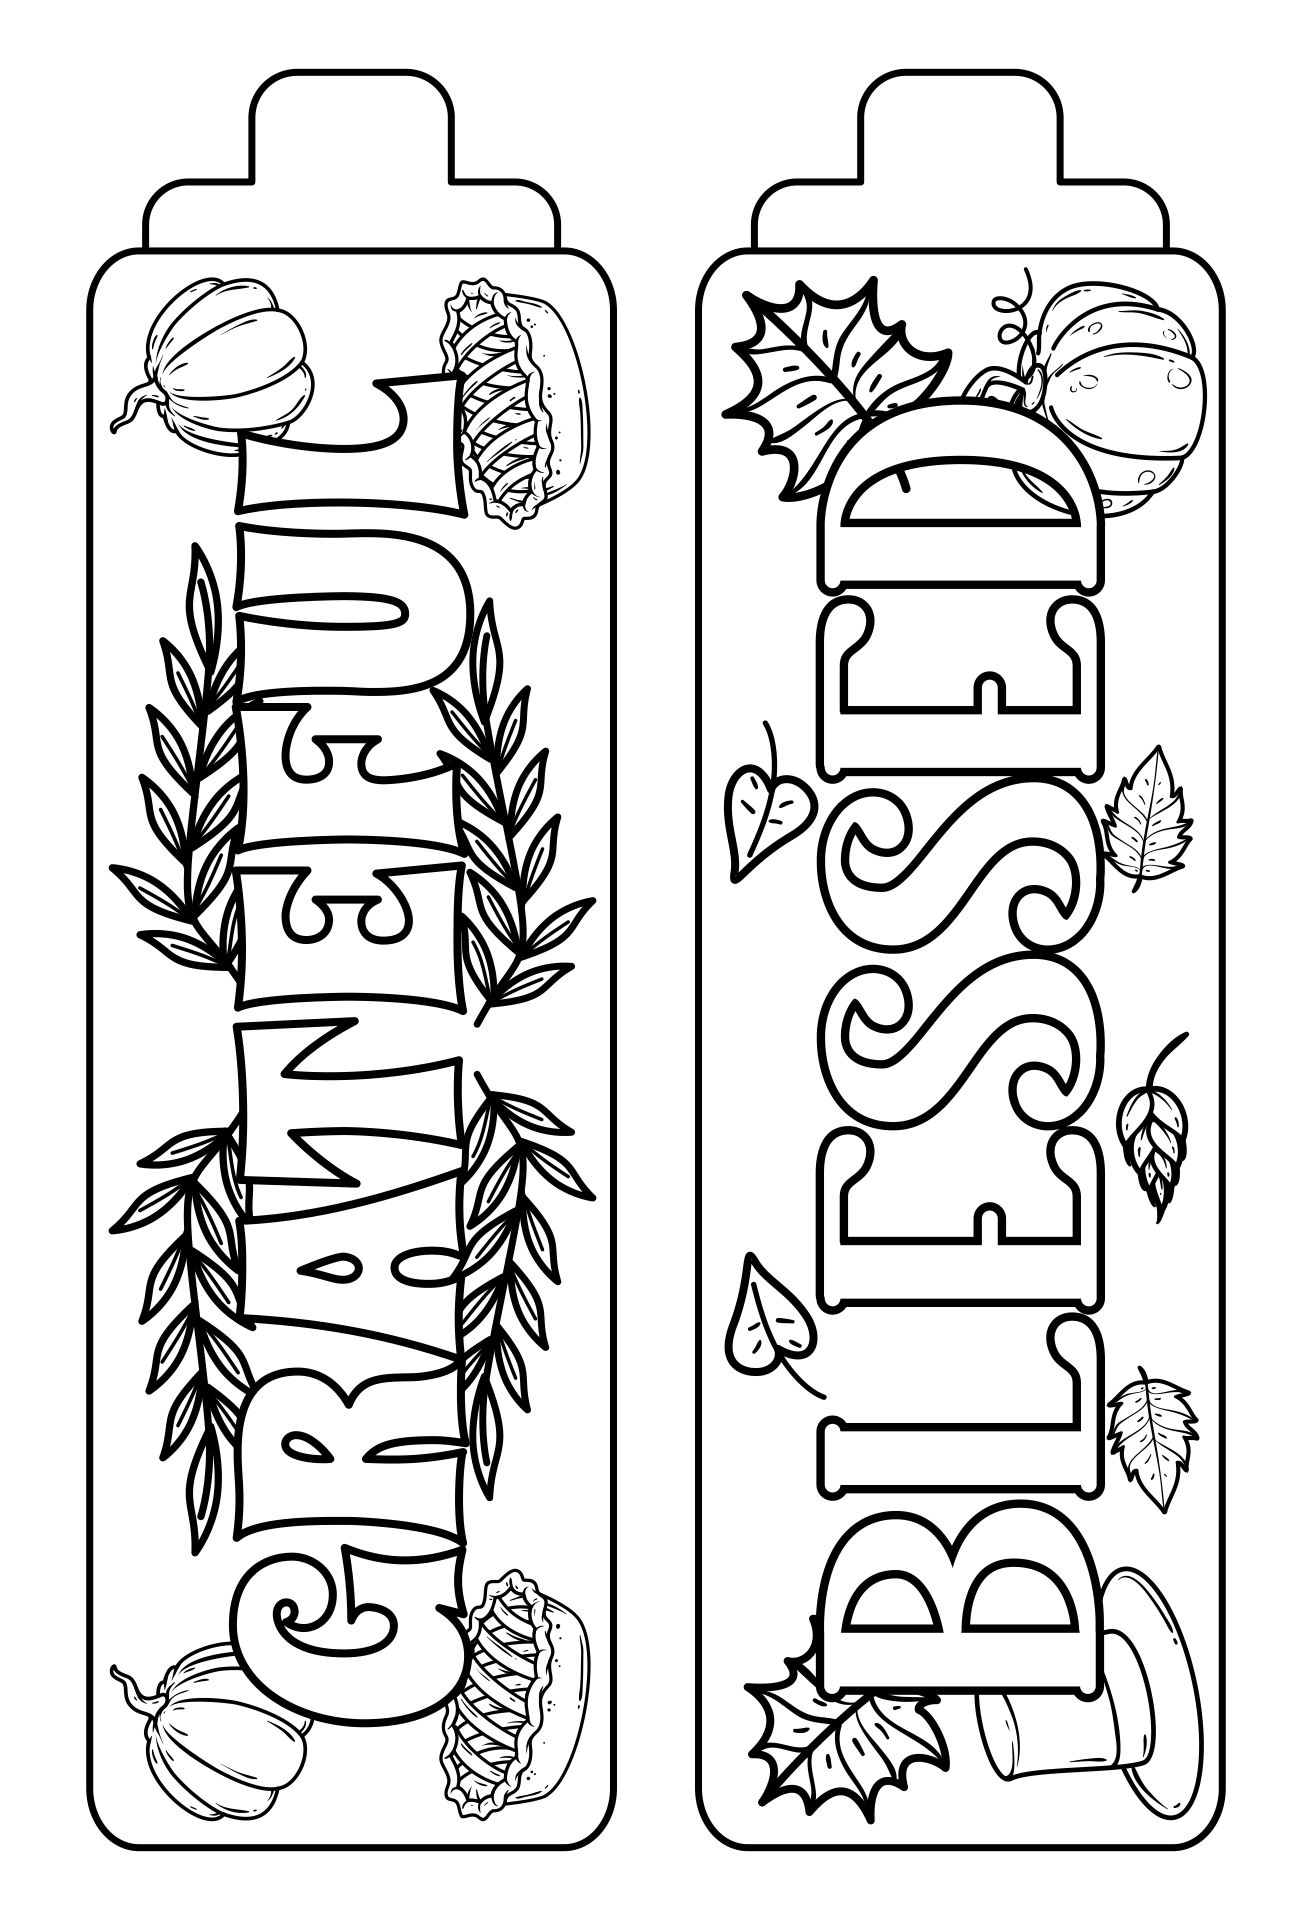 Printable Reading Bookmarks to Color